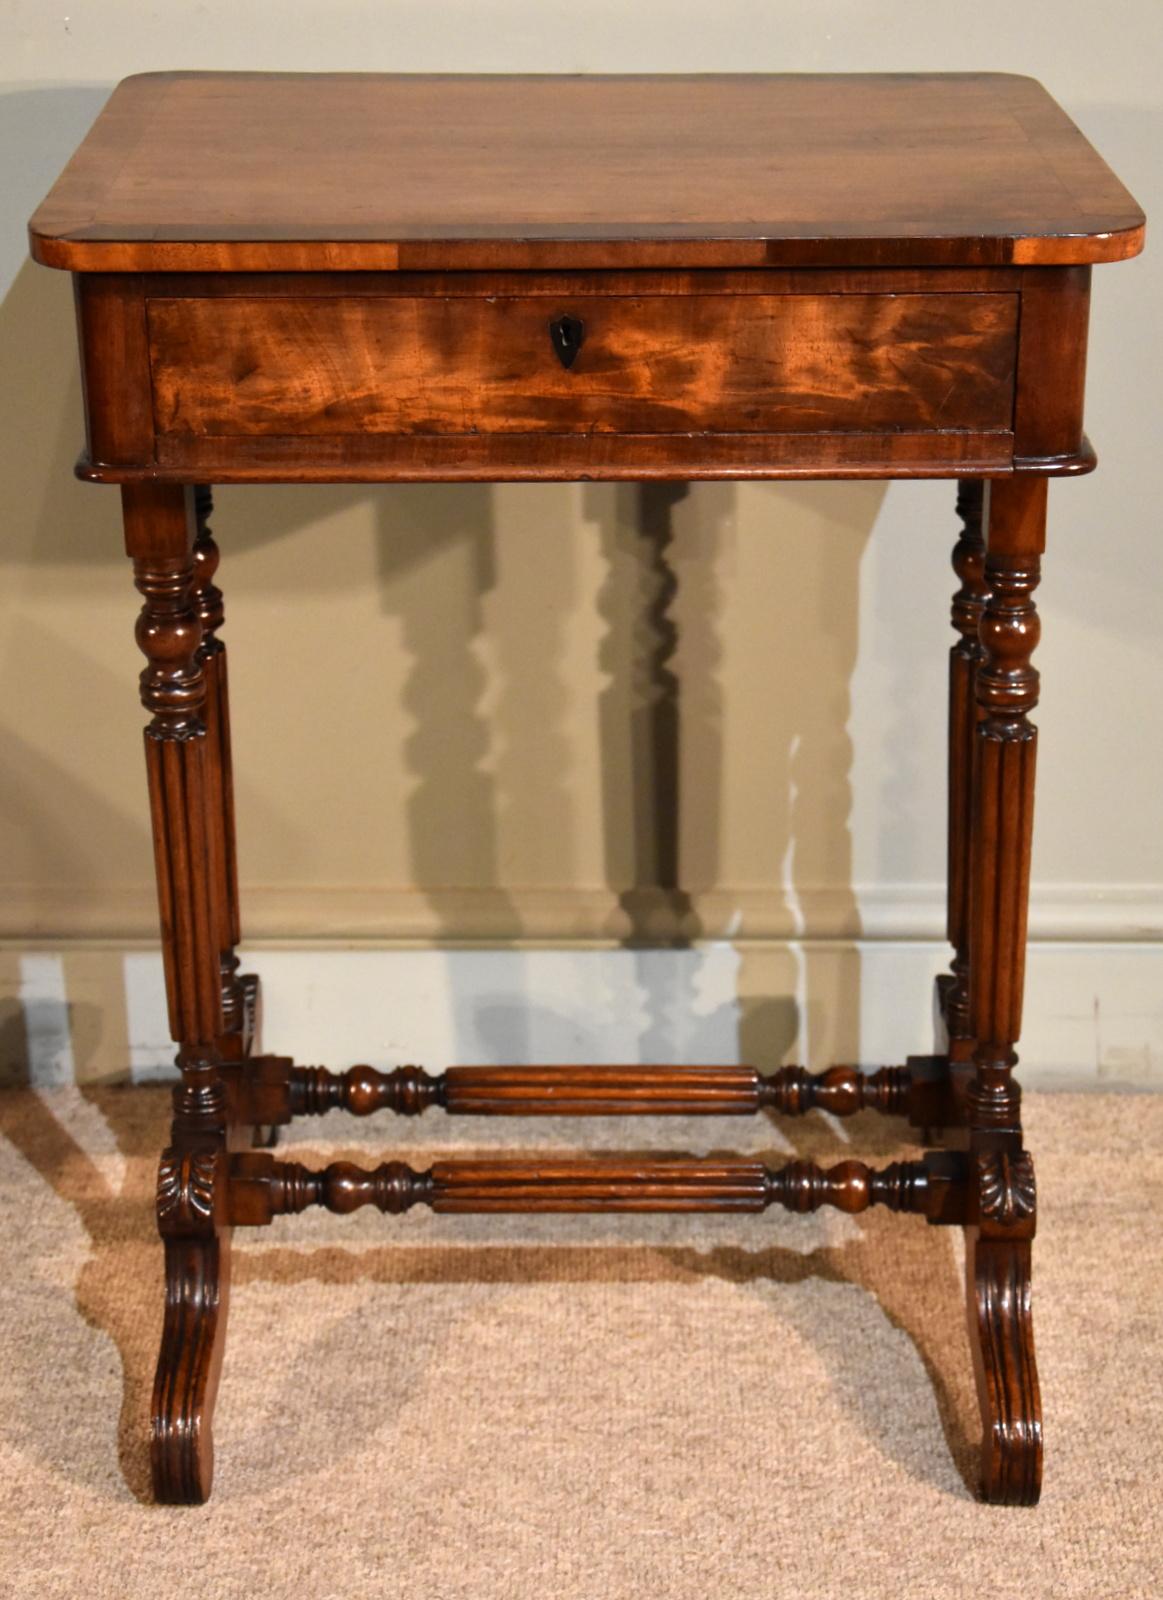 An excellent quality Regency mahogany work table of superb color and proportions. Originally had a silk box or sewing

Measures: Height 27